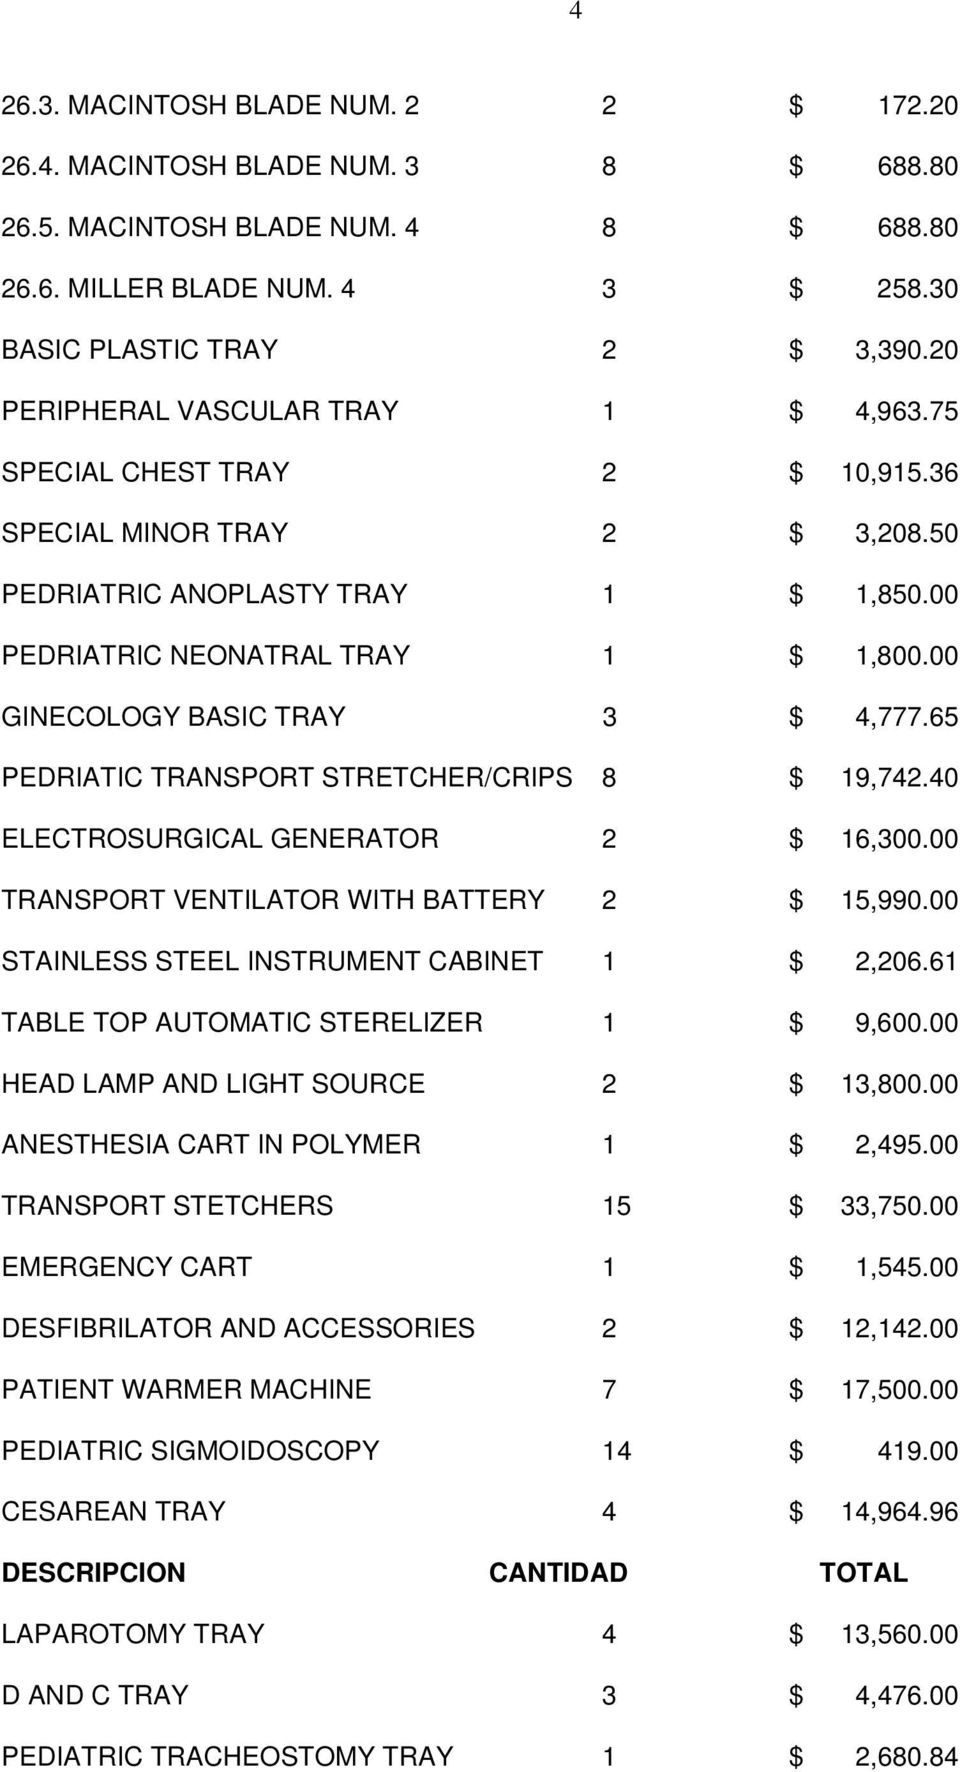 00 GINECOLOGY BASIC TRAY 3 $ 4,777.65 PEDRIATIC TRANSPORT STRETCHER/CRIPS 8 $ 19,742.40 ELECTROSURGICAL GENERATOR 2 $ 16,300.00 TRANSPORT VENTILATOR WITH BATTERY 2 $ 15,990.